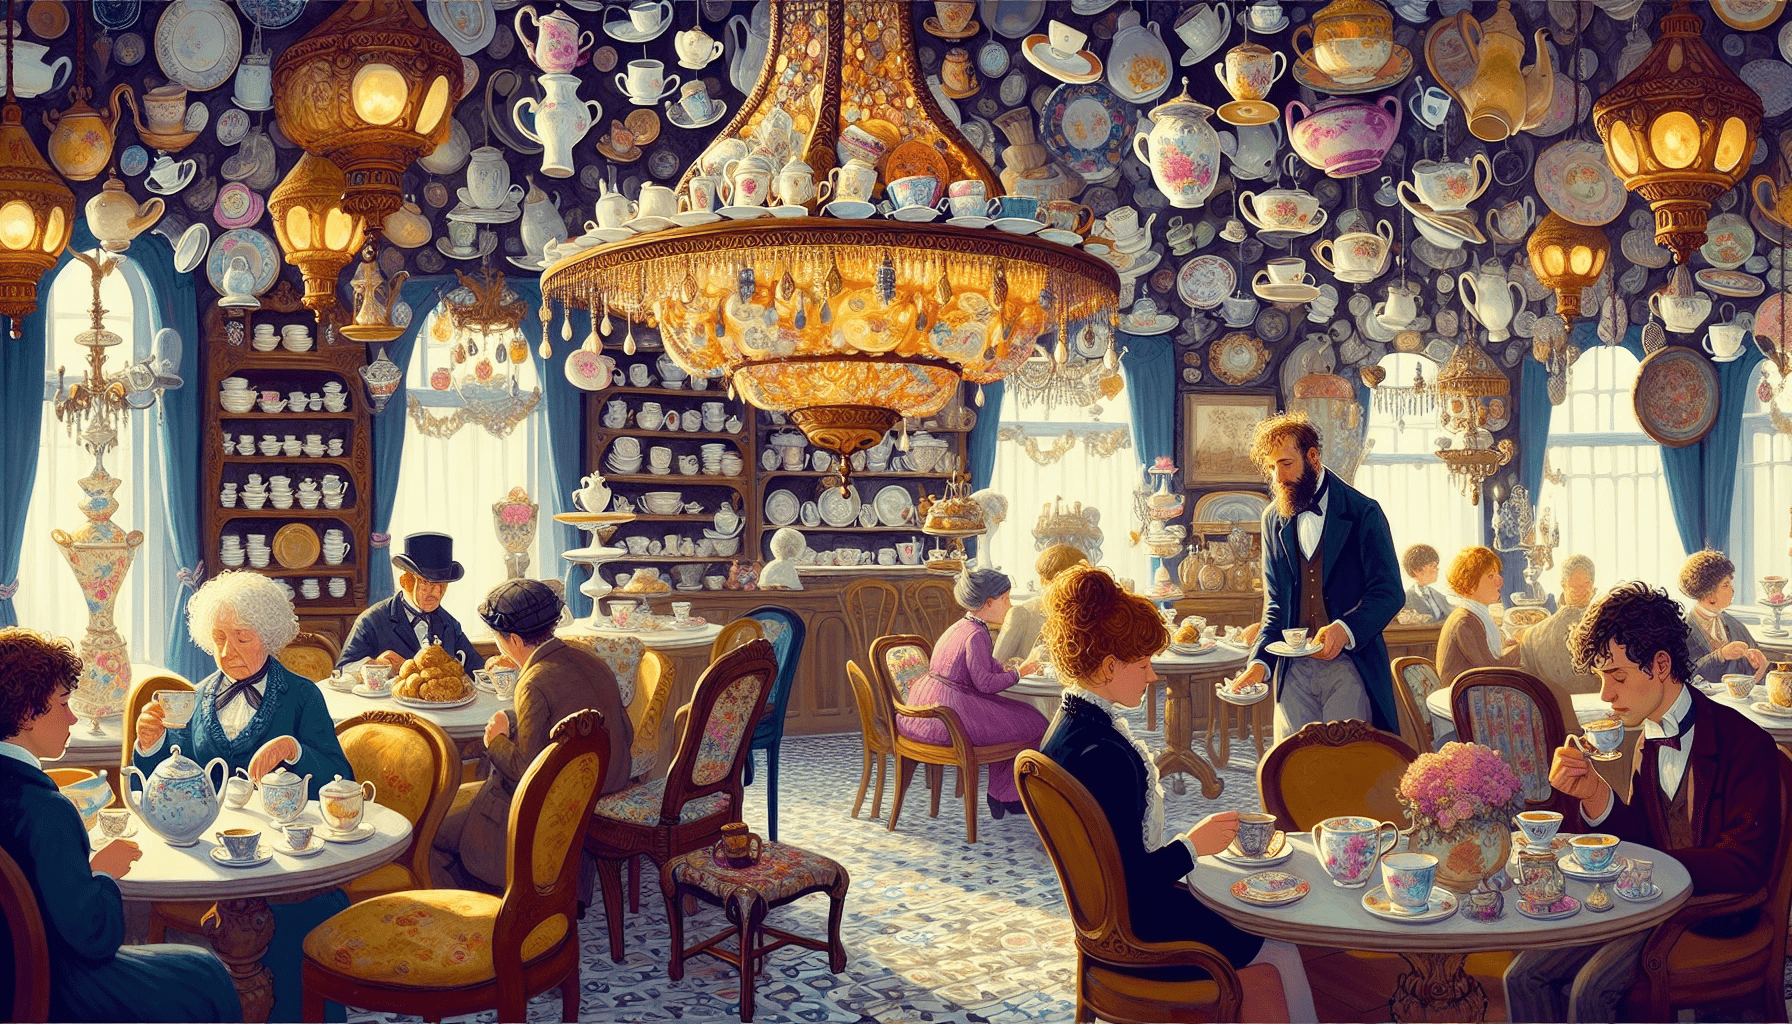 A Peculiar Tea's unique themed dining experience